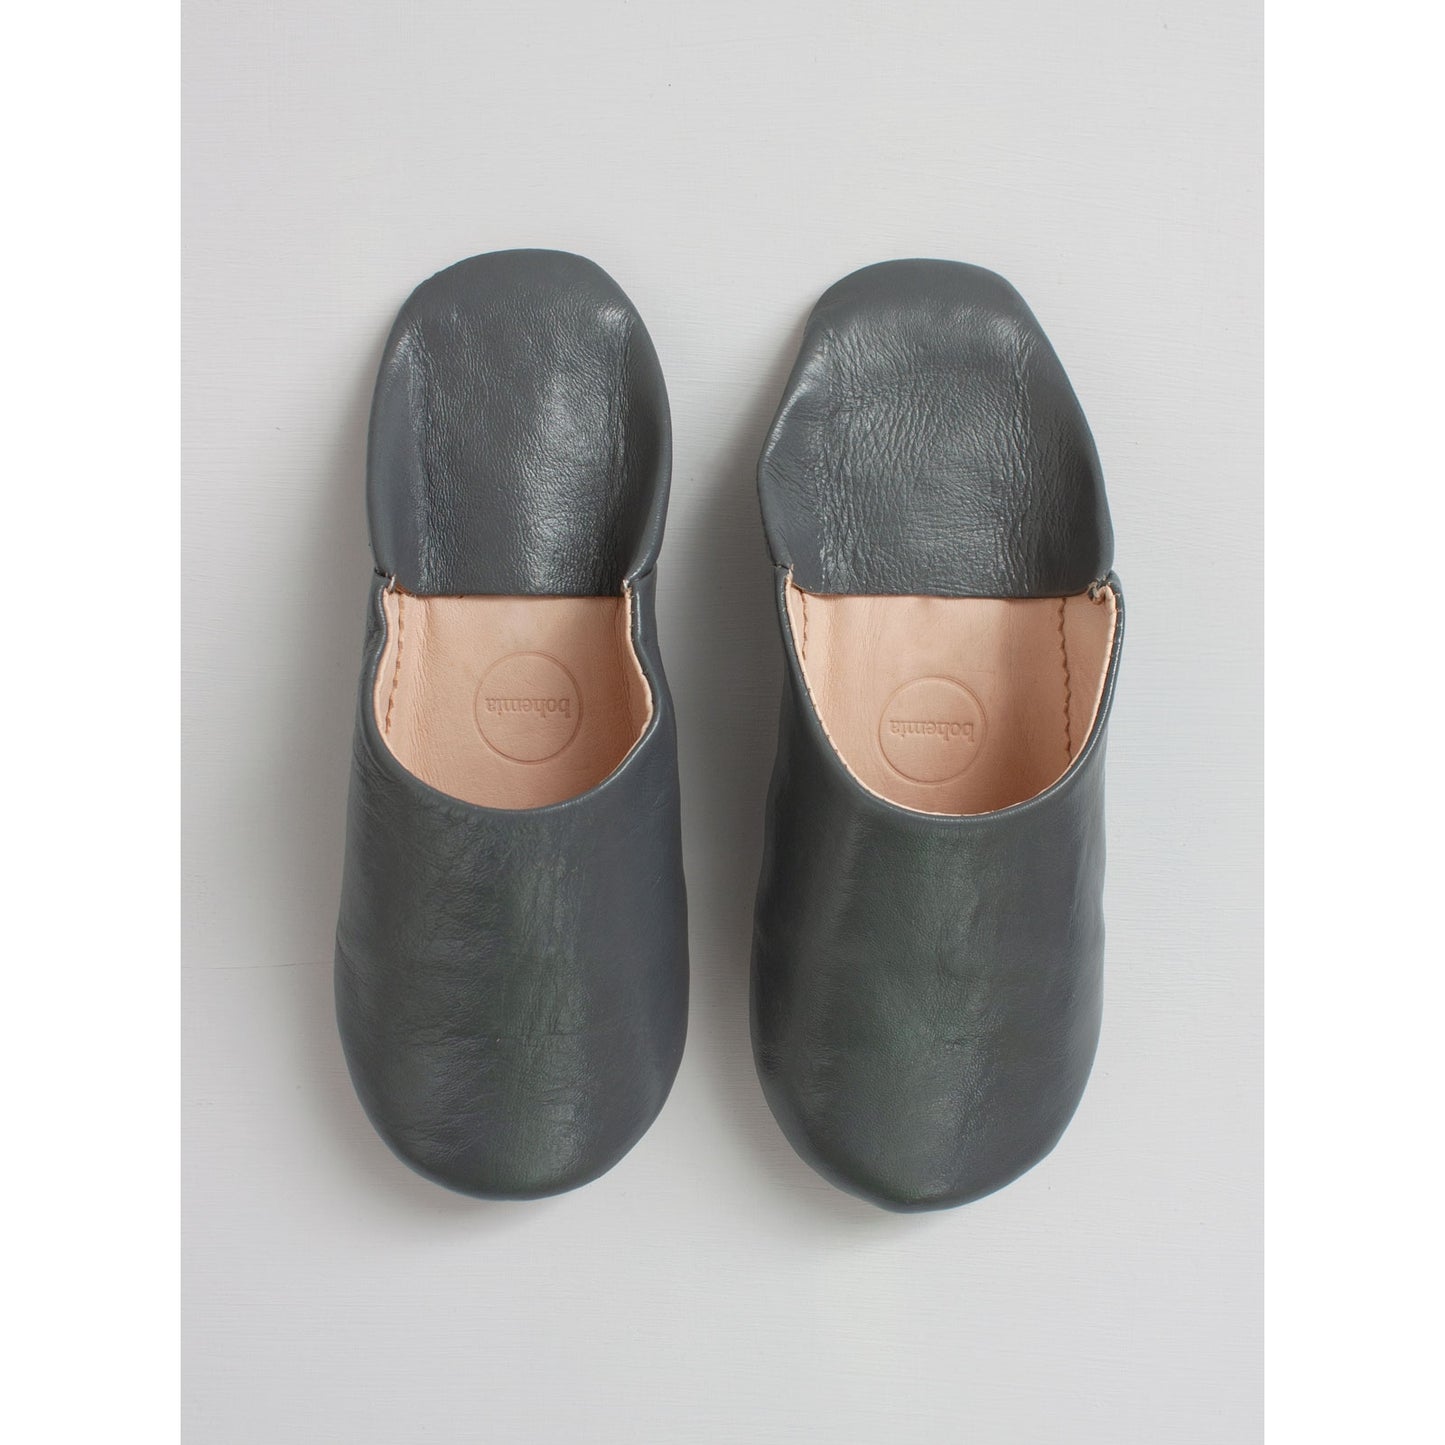 Moroccan Babouche Slippers, Grey